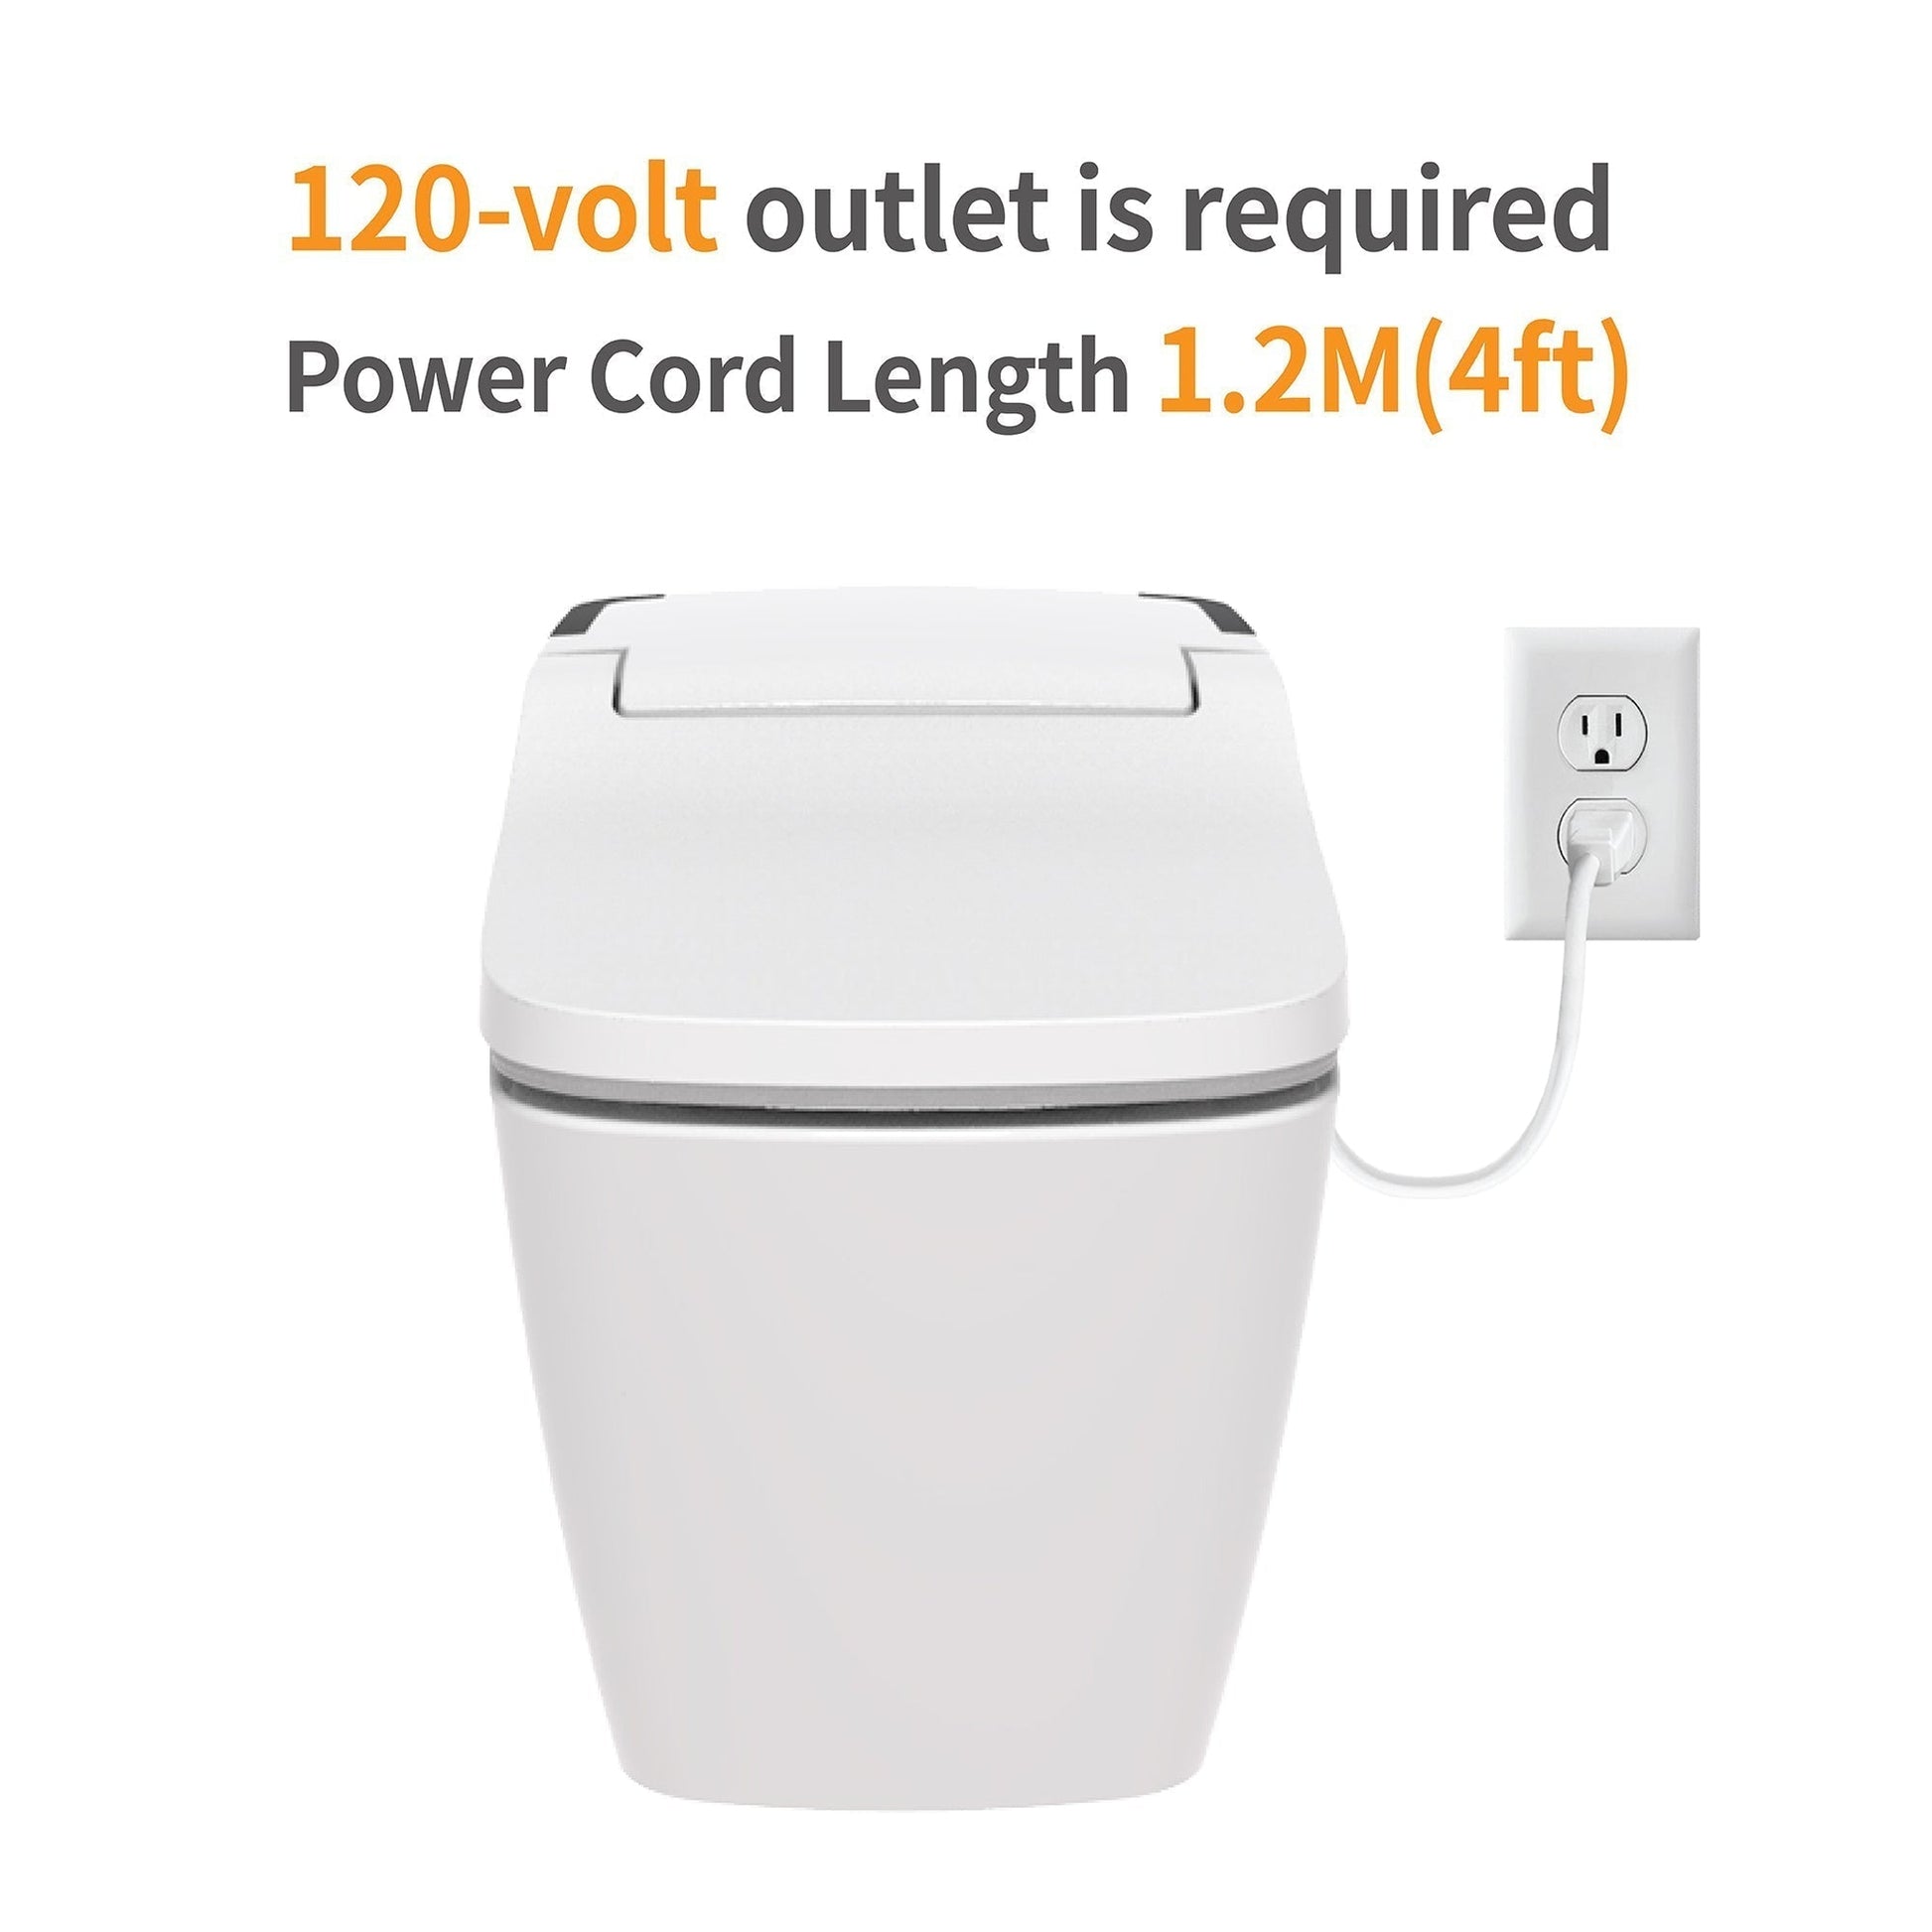 VOVO Stylement TCB-090S Electric Integrated Smart Bidet Toilet With Auto Flush, UV LED Sterilization, Smart Toilet Bidet, Heated Seat, Warm Dry and Water and Remote Control